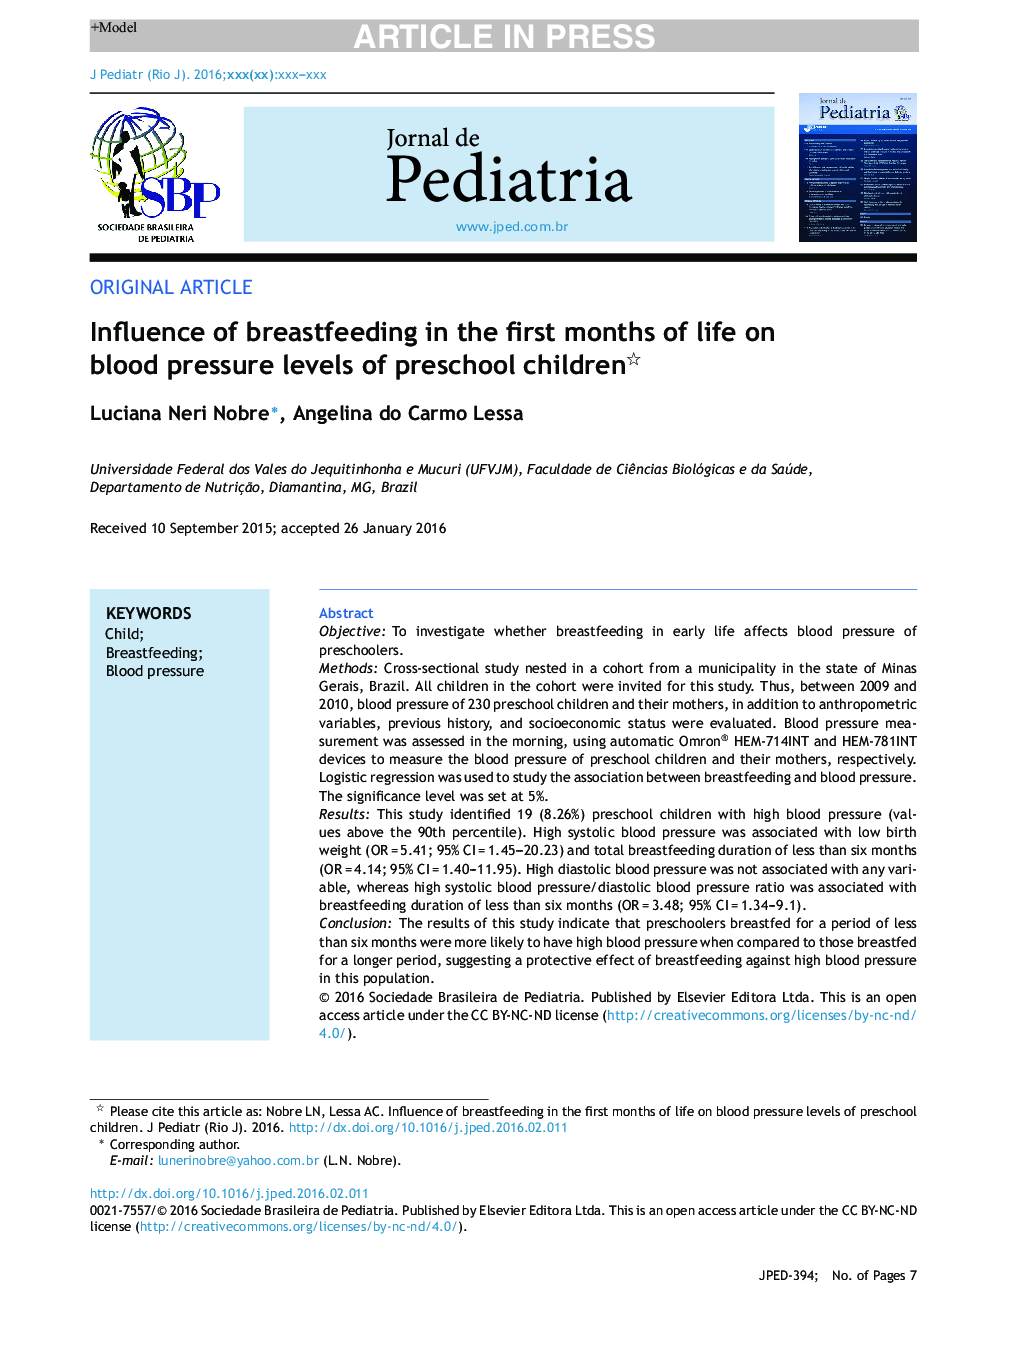 Influence of breastfeeding in the first months of life on blood pressure levels of preschool children